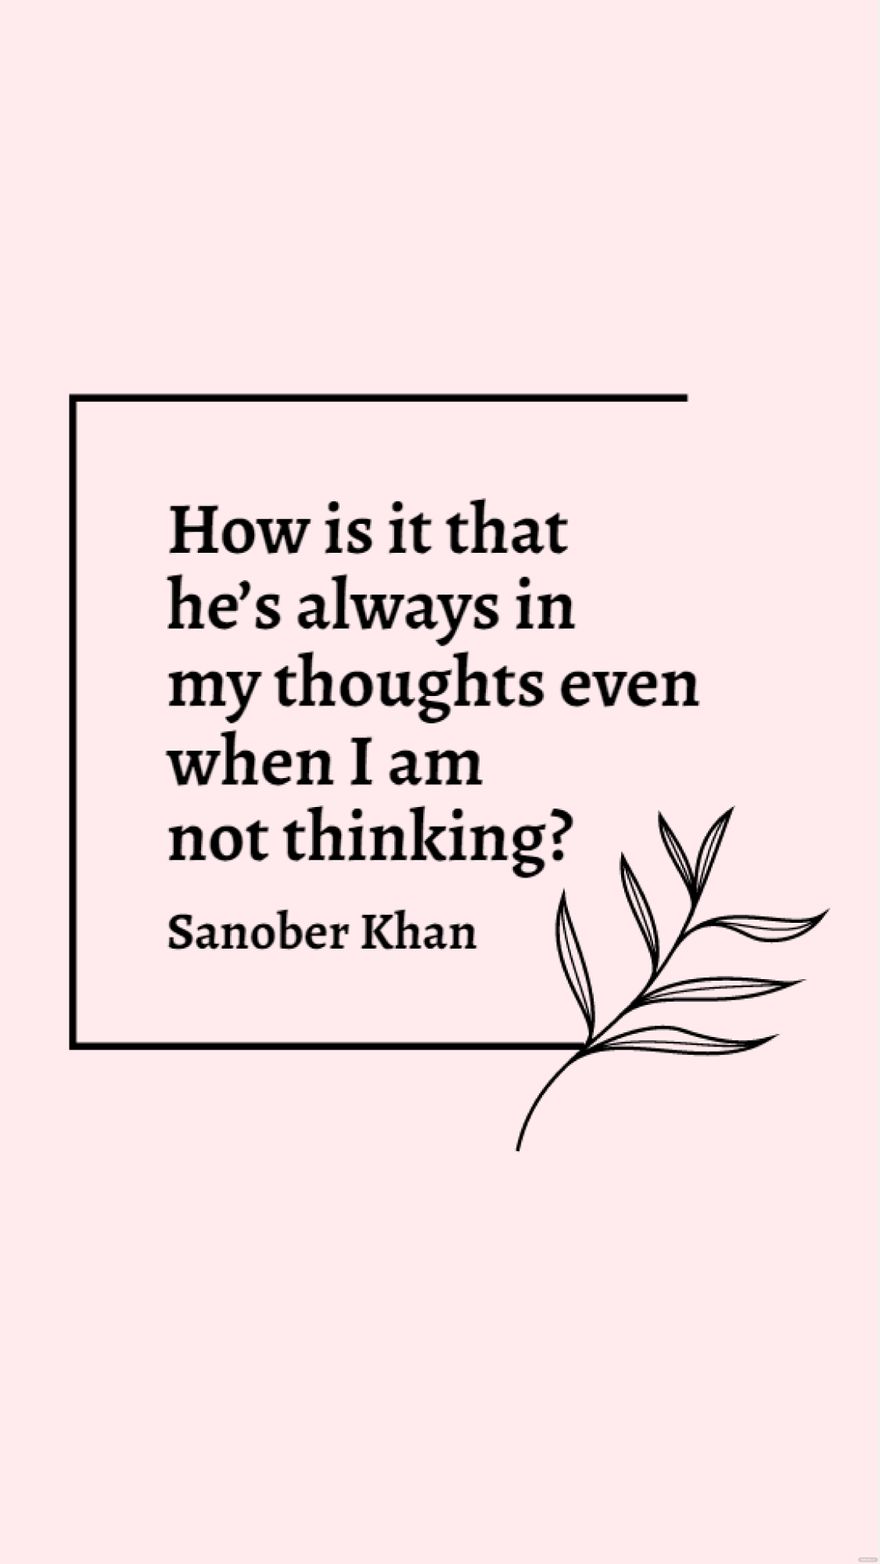 Sanober Khan - How is it that he’s always in my thoughts even when I am not thinking?